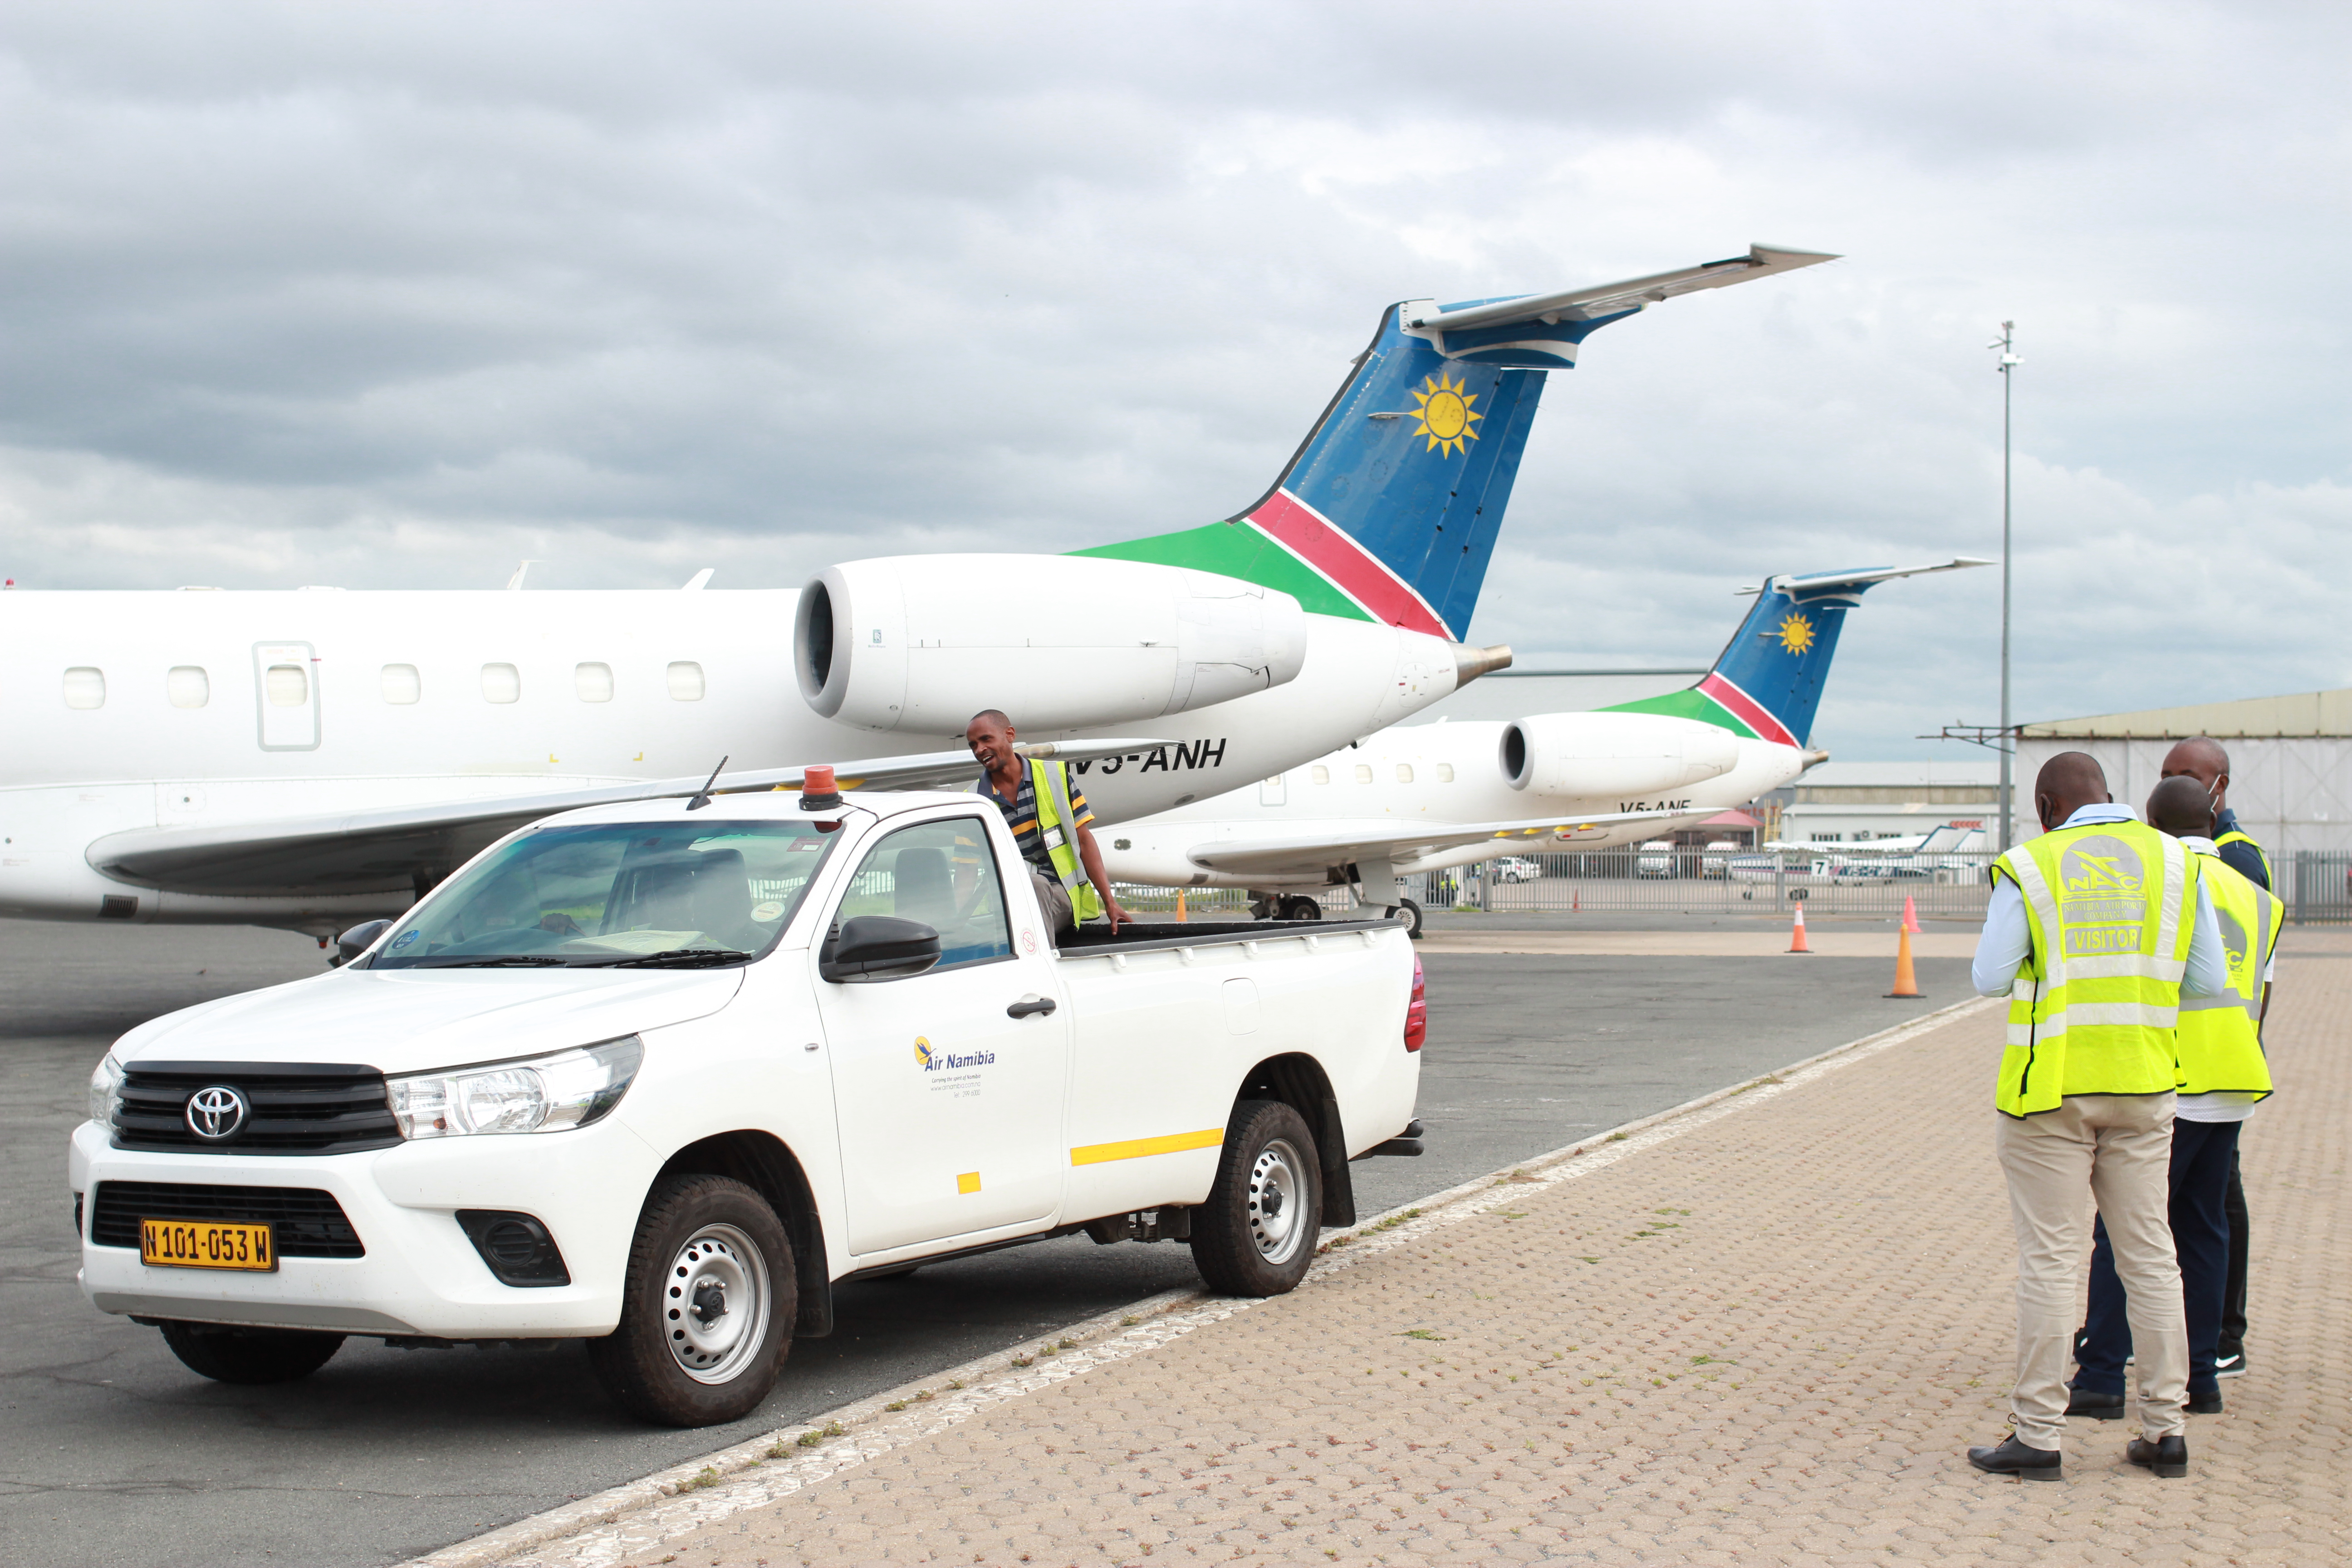 Air Namibia’s new business plan doubtful